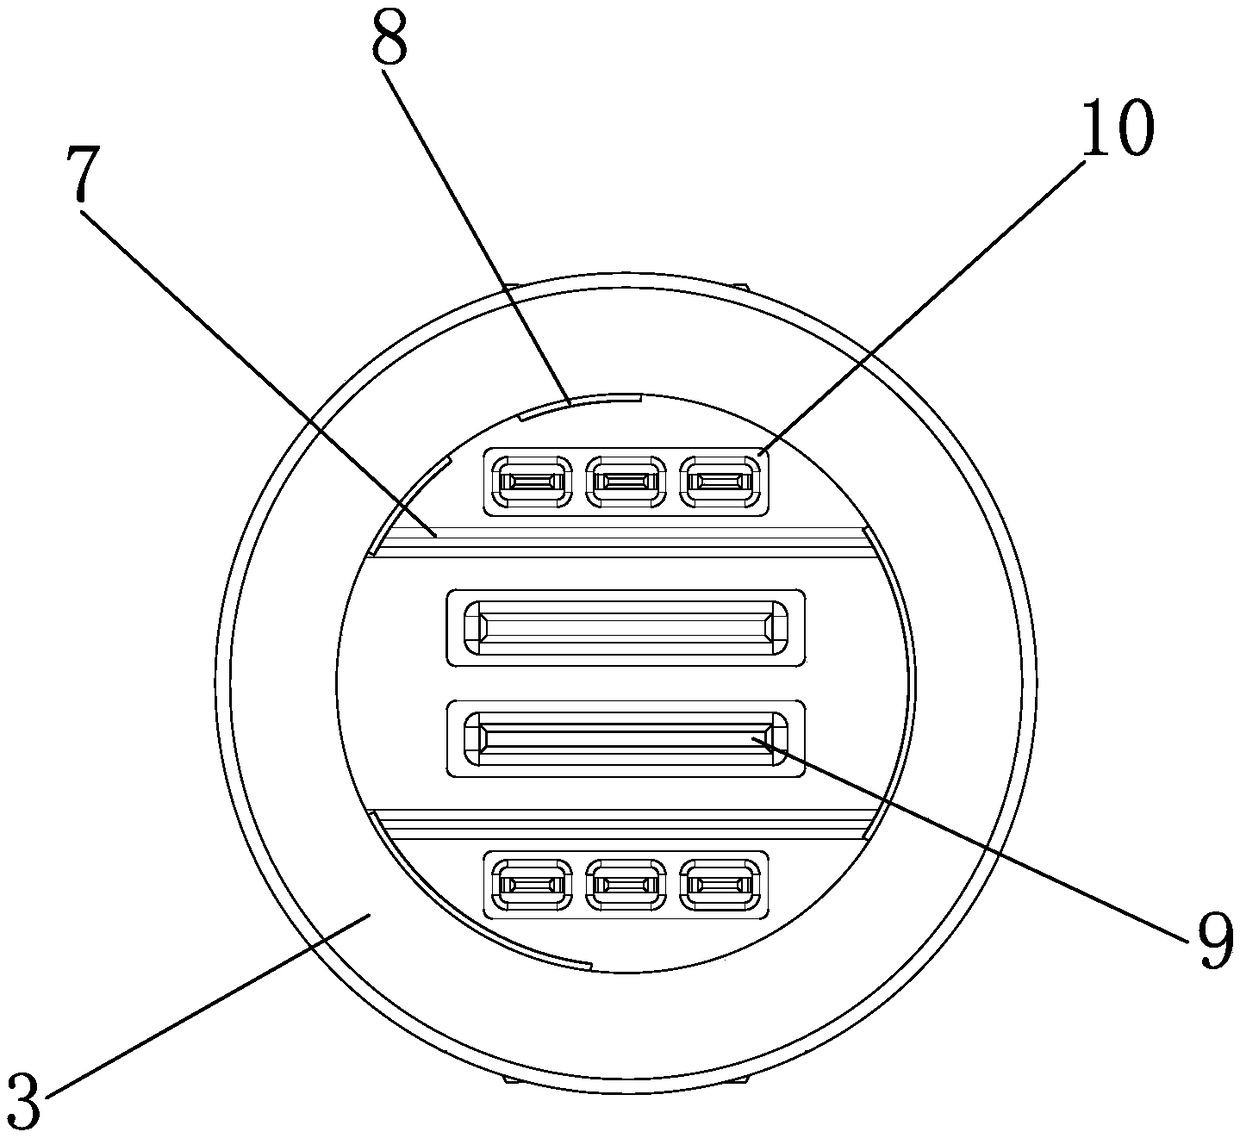 Novel lithium-battery charging connector